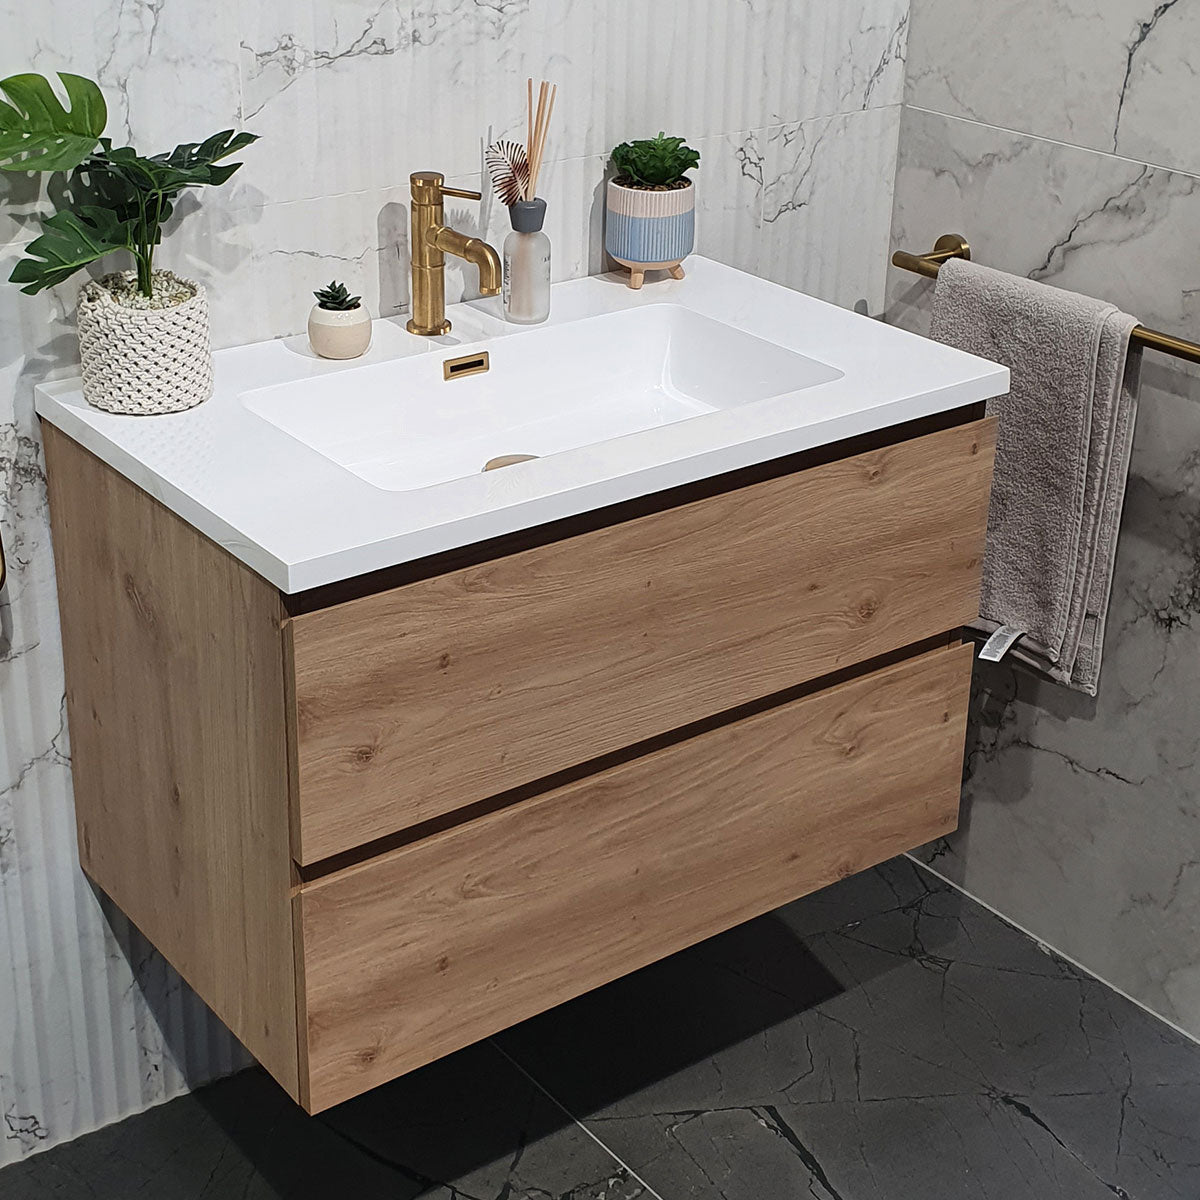 Granlusso Rocco Oak Wall Mounted Vanity Unit With Gloss White Washbasin